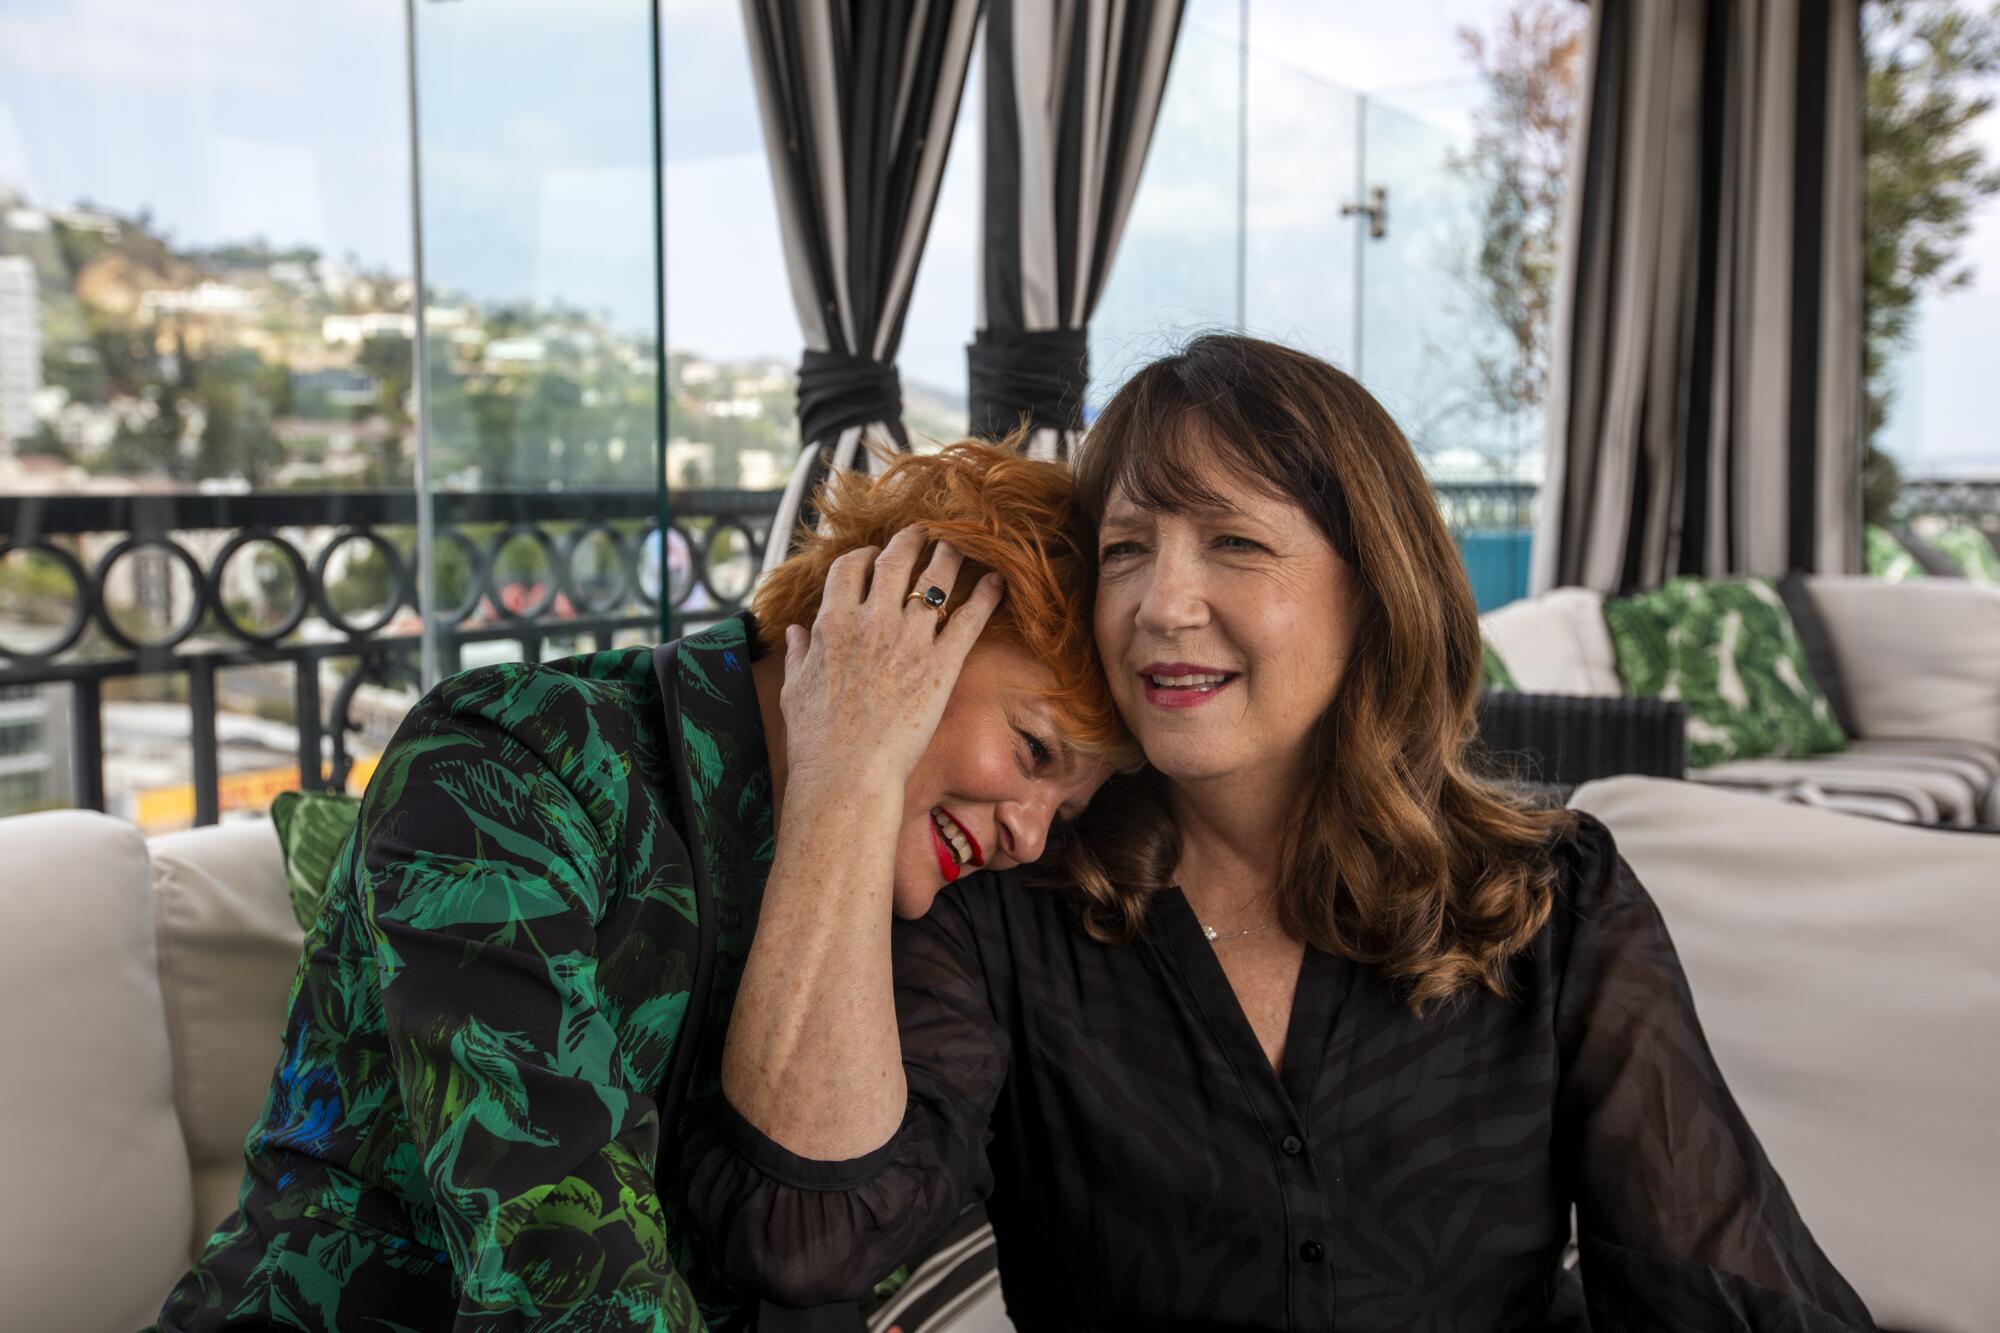 Martha Plimpton nuzzles Ann Dowd on a couch. They co-star in the indie drama "Mass."